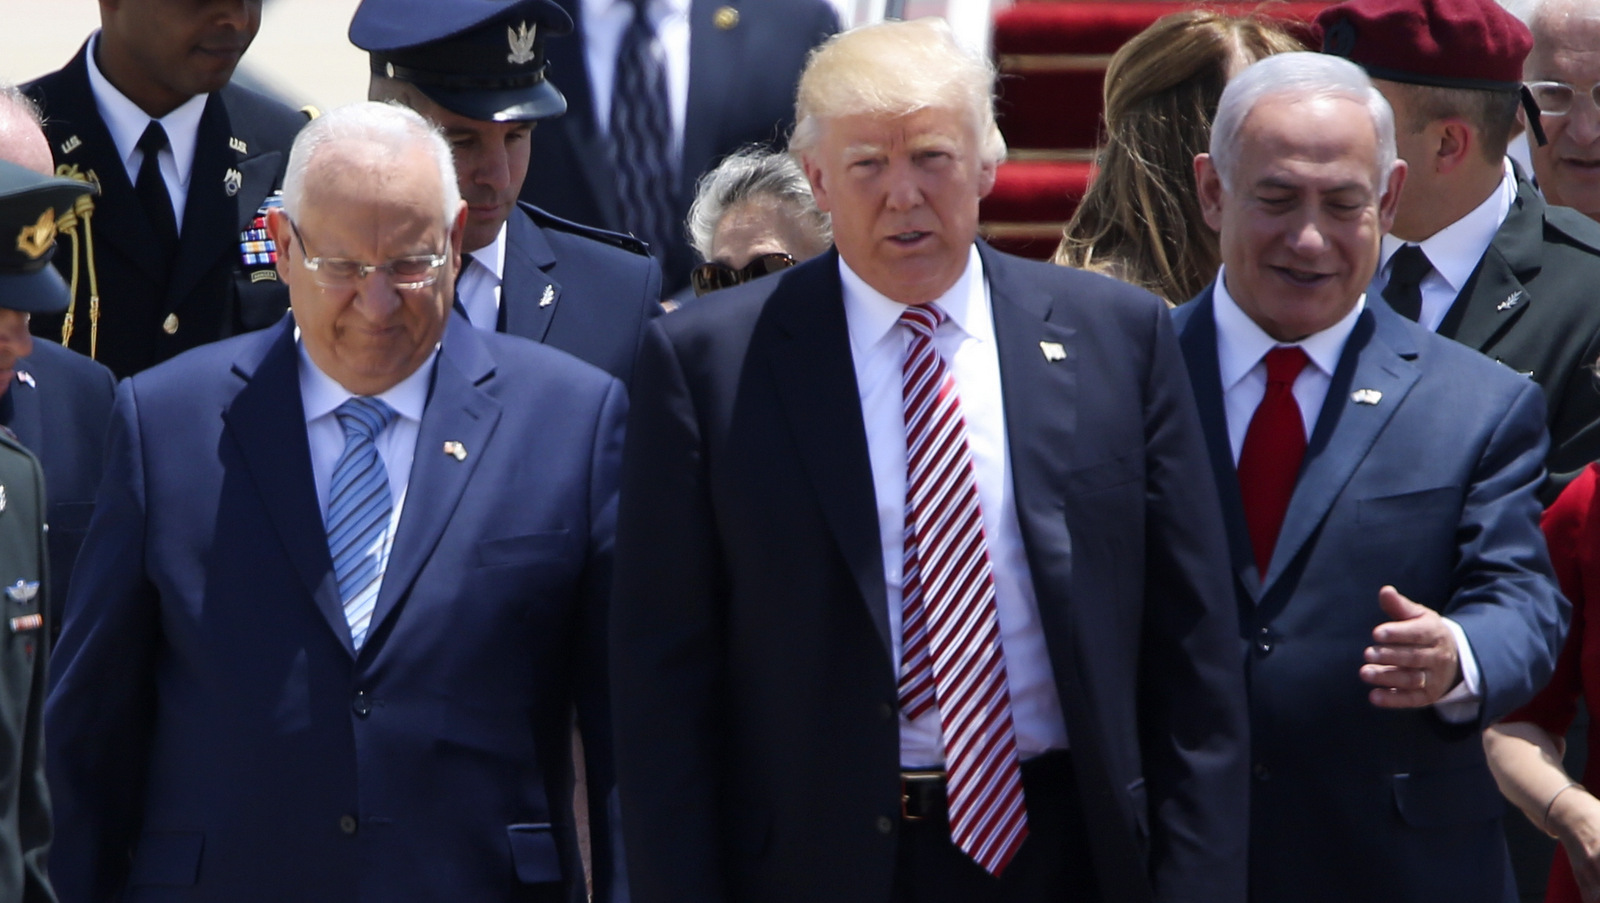 US President Donald Trump walks on his arrival accompanied by the Israeli President Rueben Rivlin, right, and Prime Minister Benjamin Netanyahu in Tel Aviv, Monday, May 22,2017. (AP/Oded Balilty)